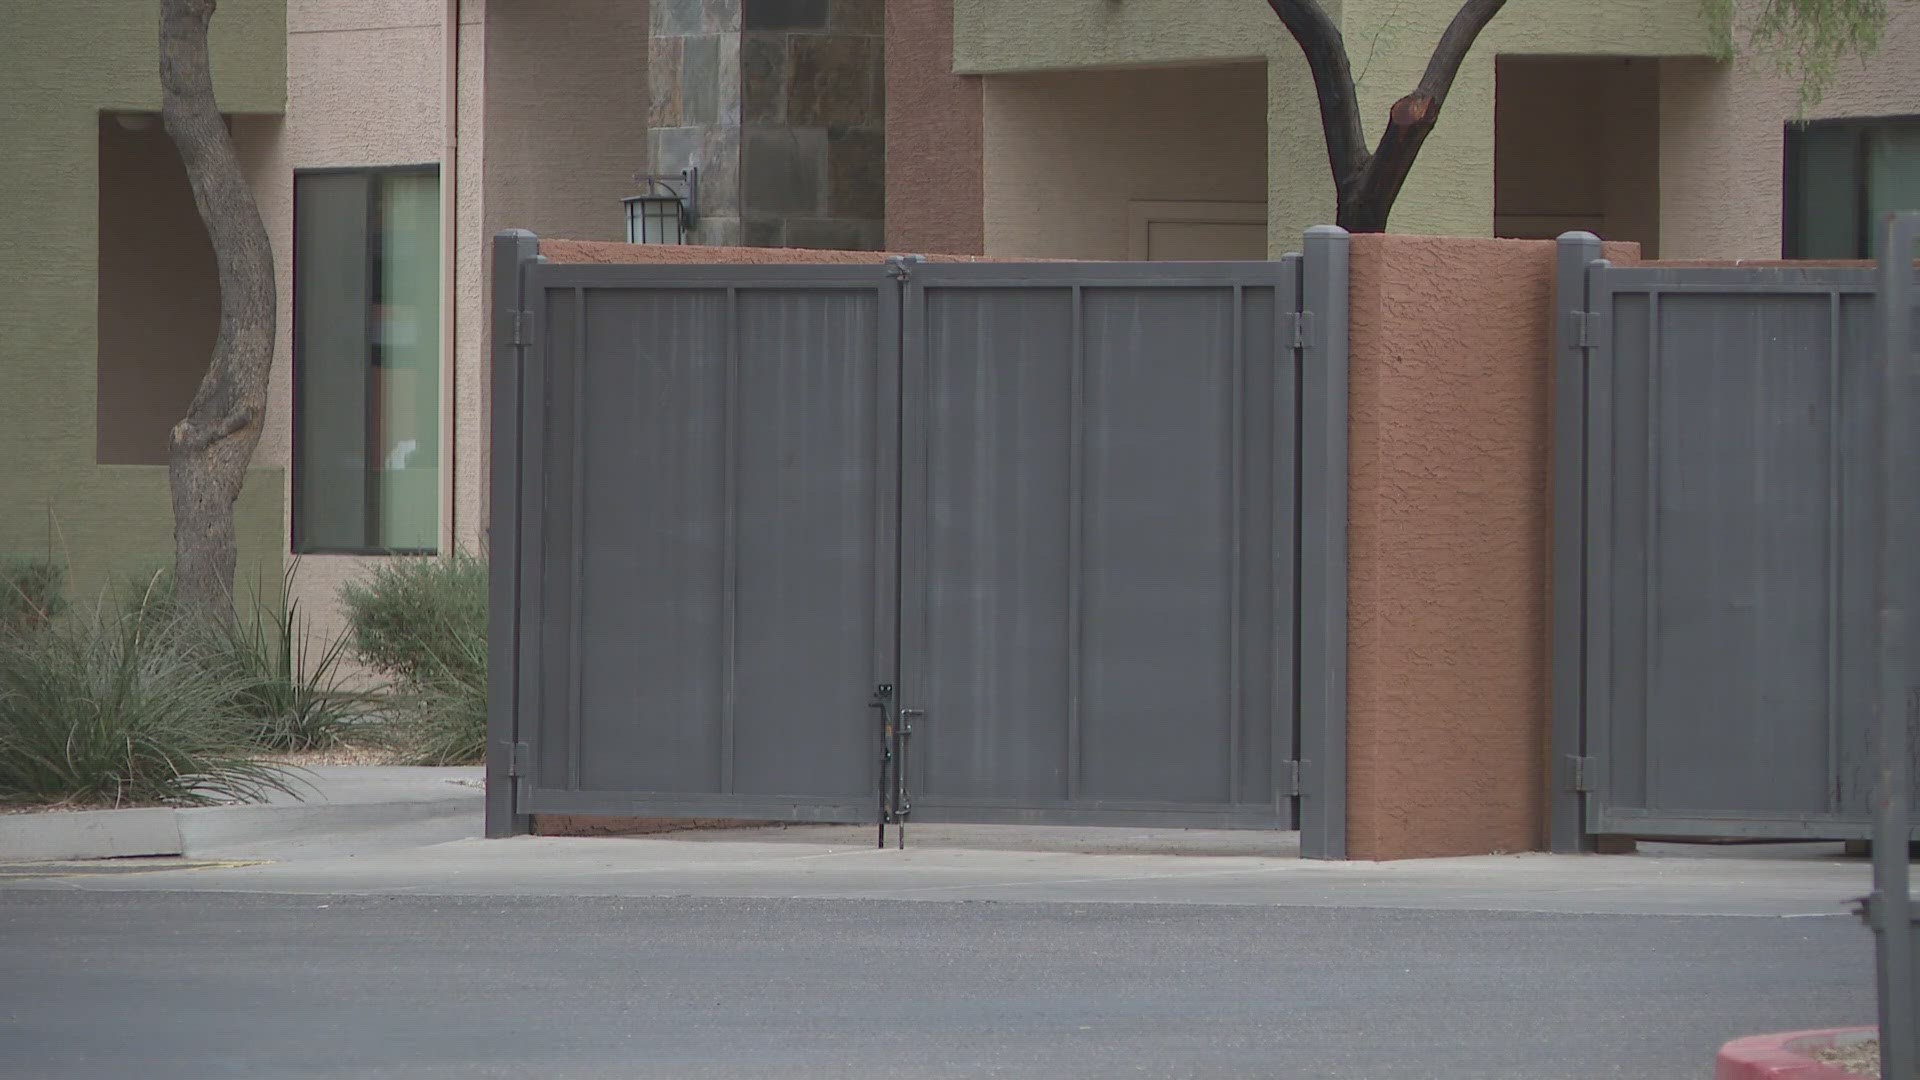 The Arizona Humane Society says the animal was found Tuesday inside a dumpster in north Phoenix.